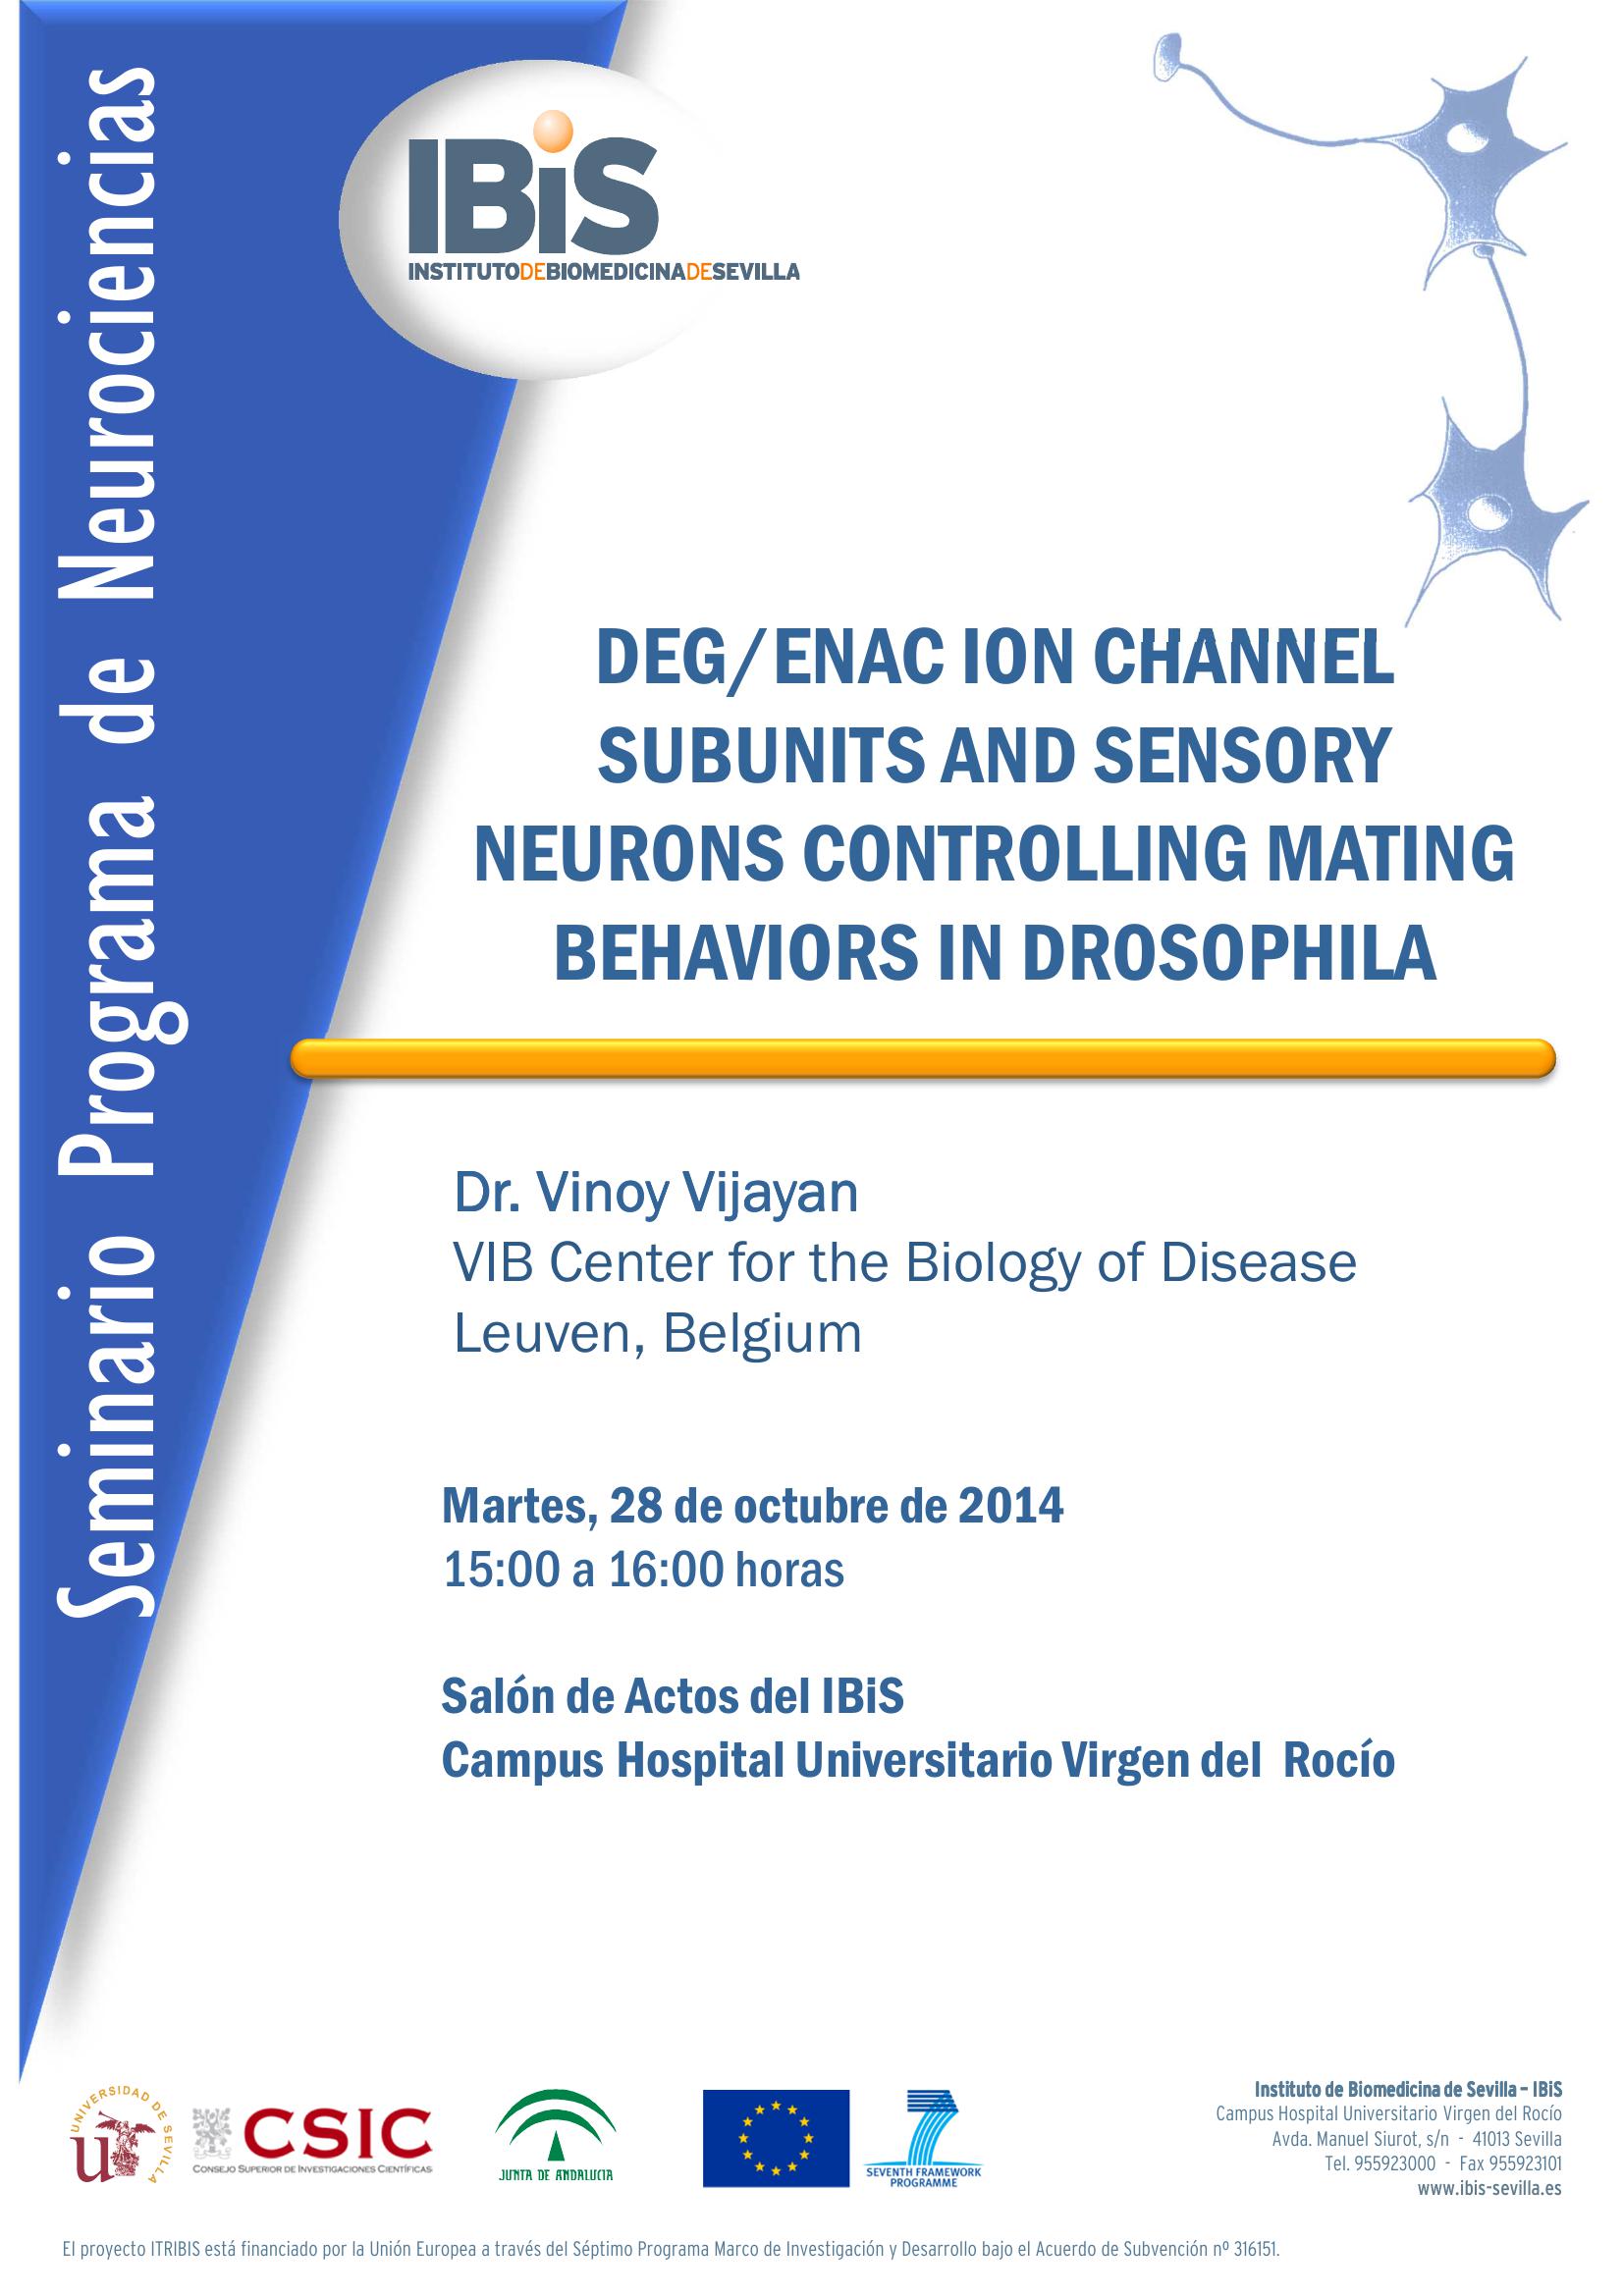 Poster: DEG/ENAC ION CHANNEL SUBUNITS AND SENSORY NEURONS CONTROLLING MATING BEHAVIORS IN DROSOPHILA